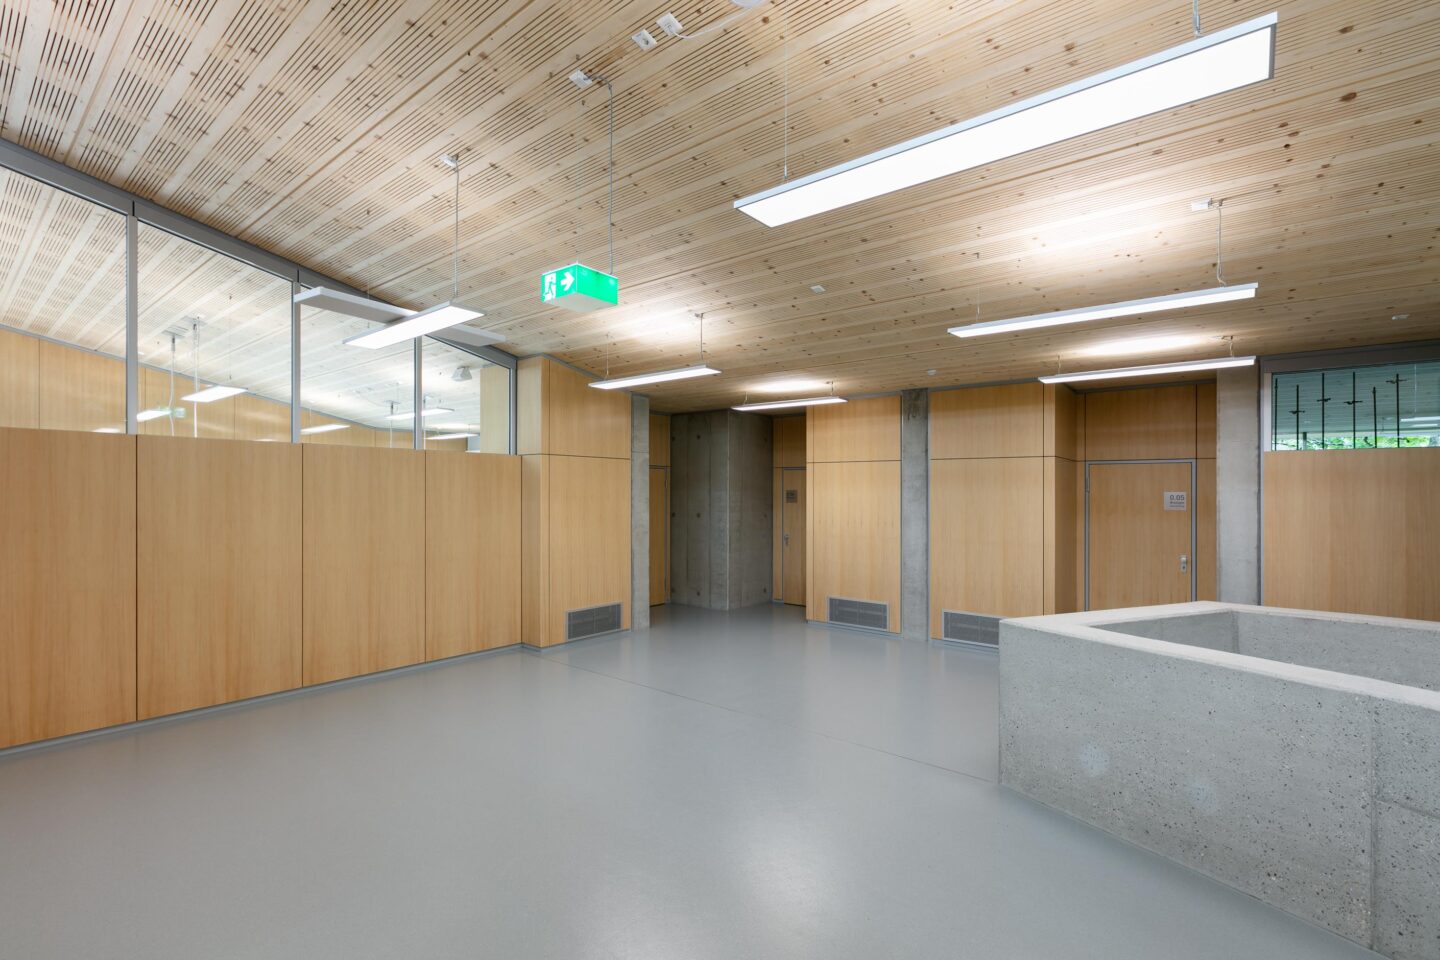 Schubart-Gymnasium Aalen │ active house with a hybrid ventilation system │ good climate